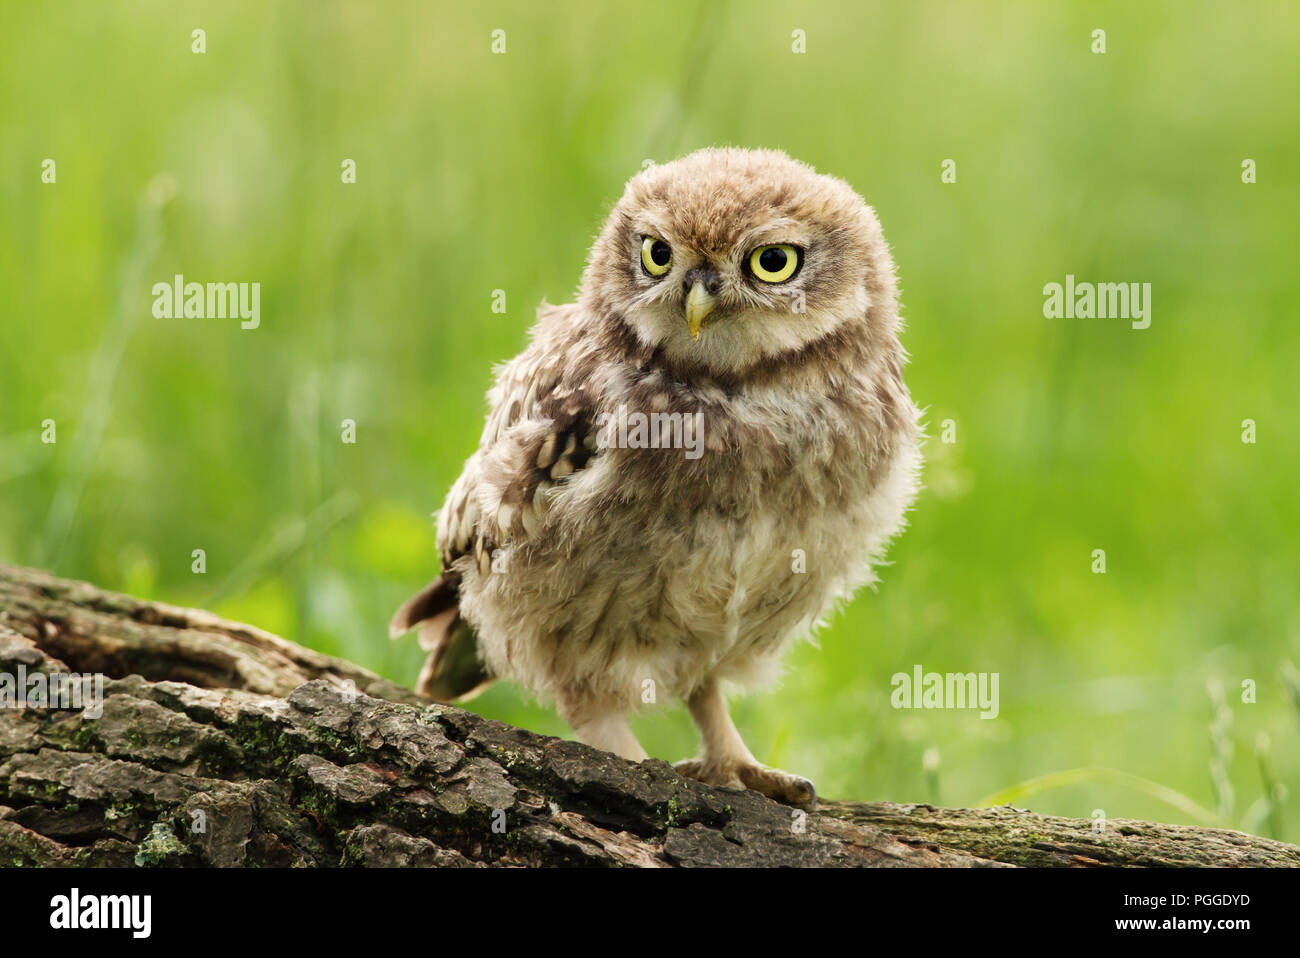 Close-up of a Juvenile Little owl perching on a tree log against green background, UK. Stock Photo